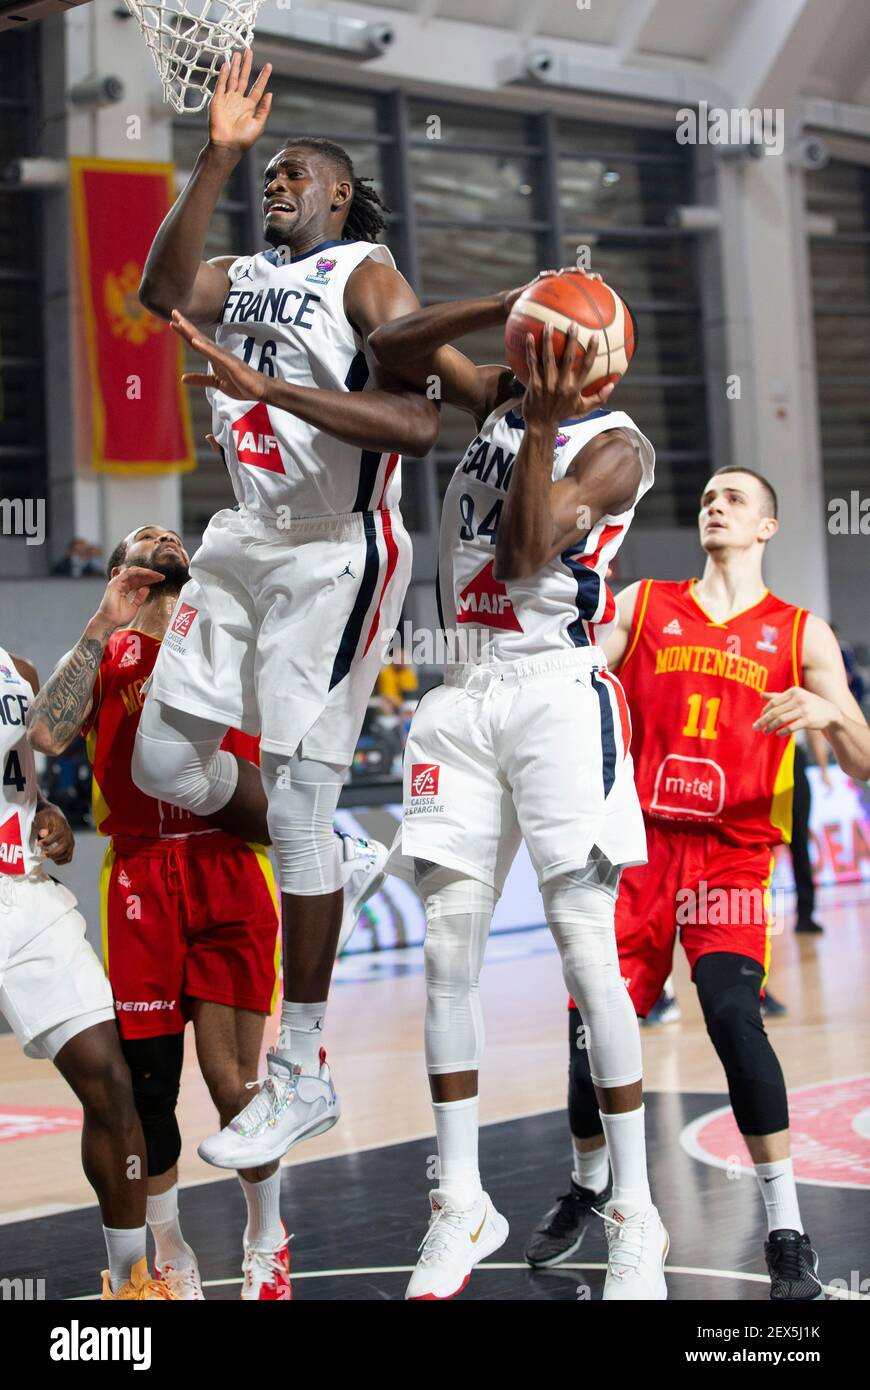 Podgorica, Montenegro. 20th February, 2021. Jerry Boutsiele of France,  Lahaou Konate of France in action under the basket. Credit: Nikola  Krstic/Alamy Live News Stock Photo - Alamy